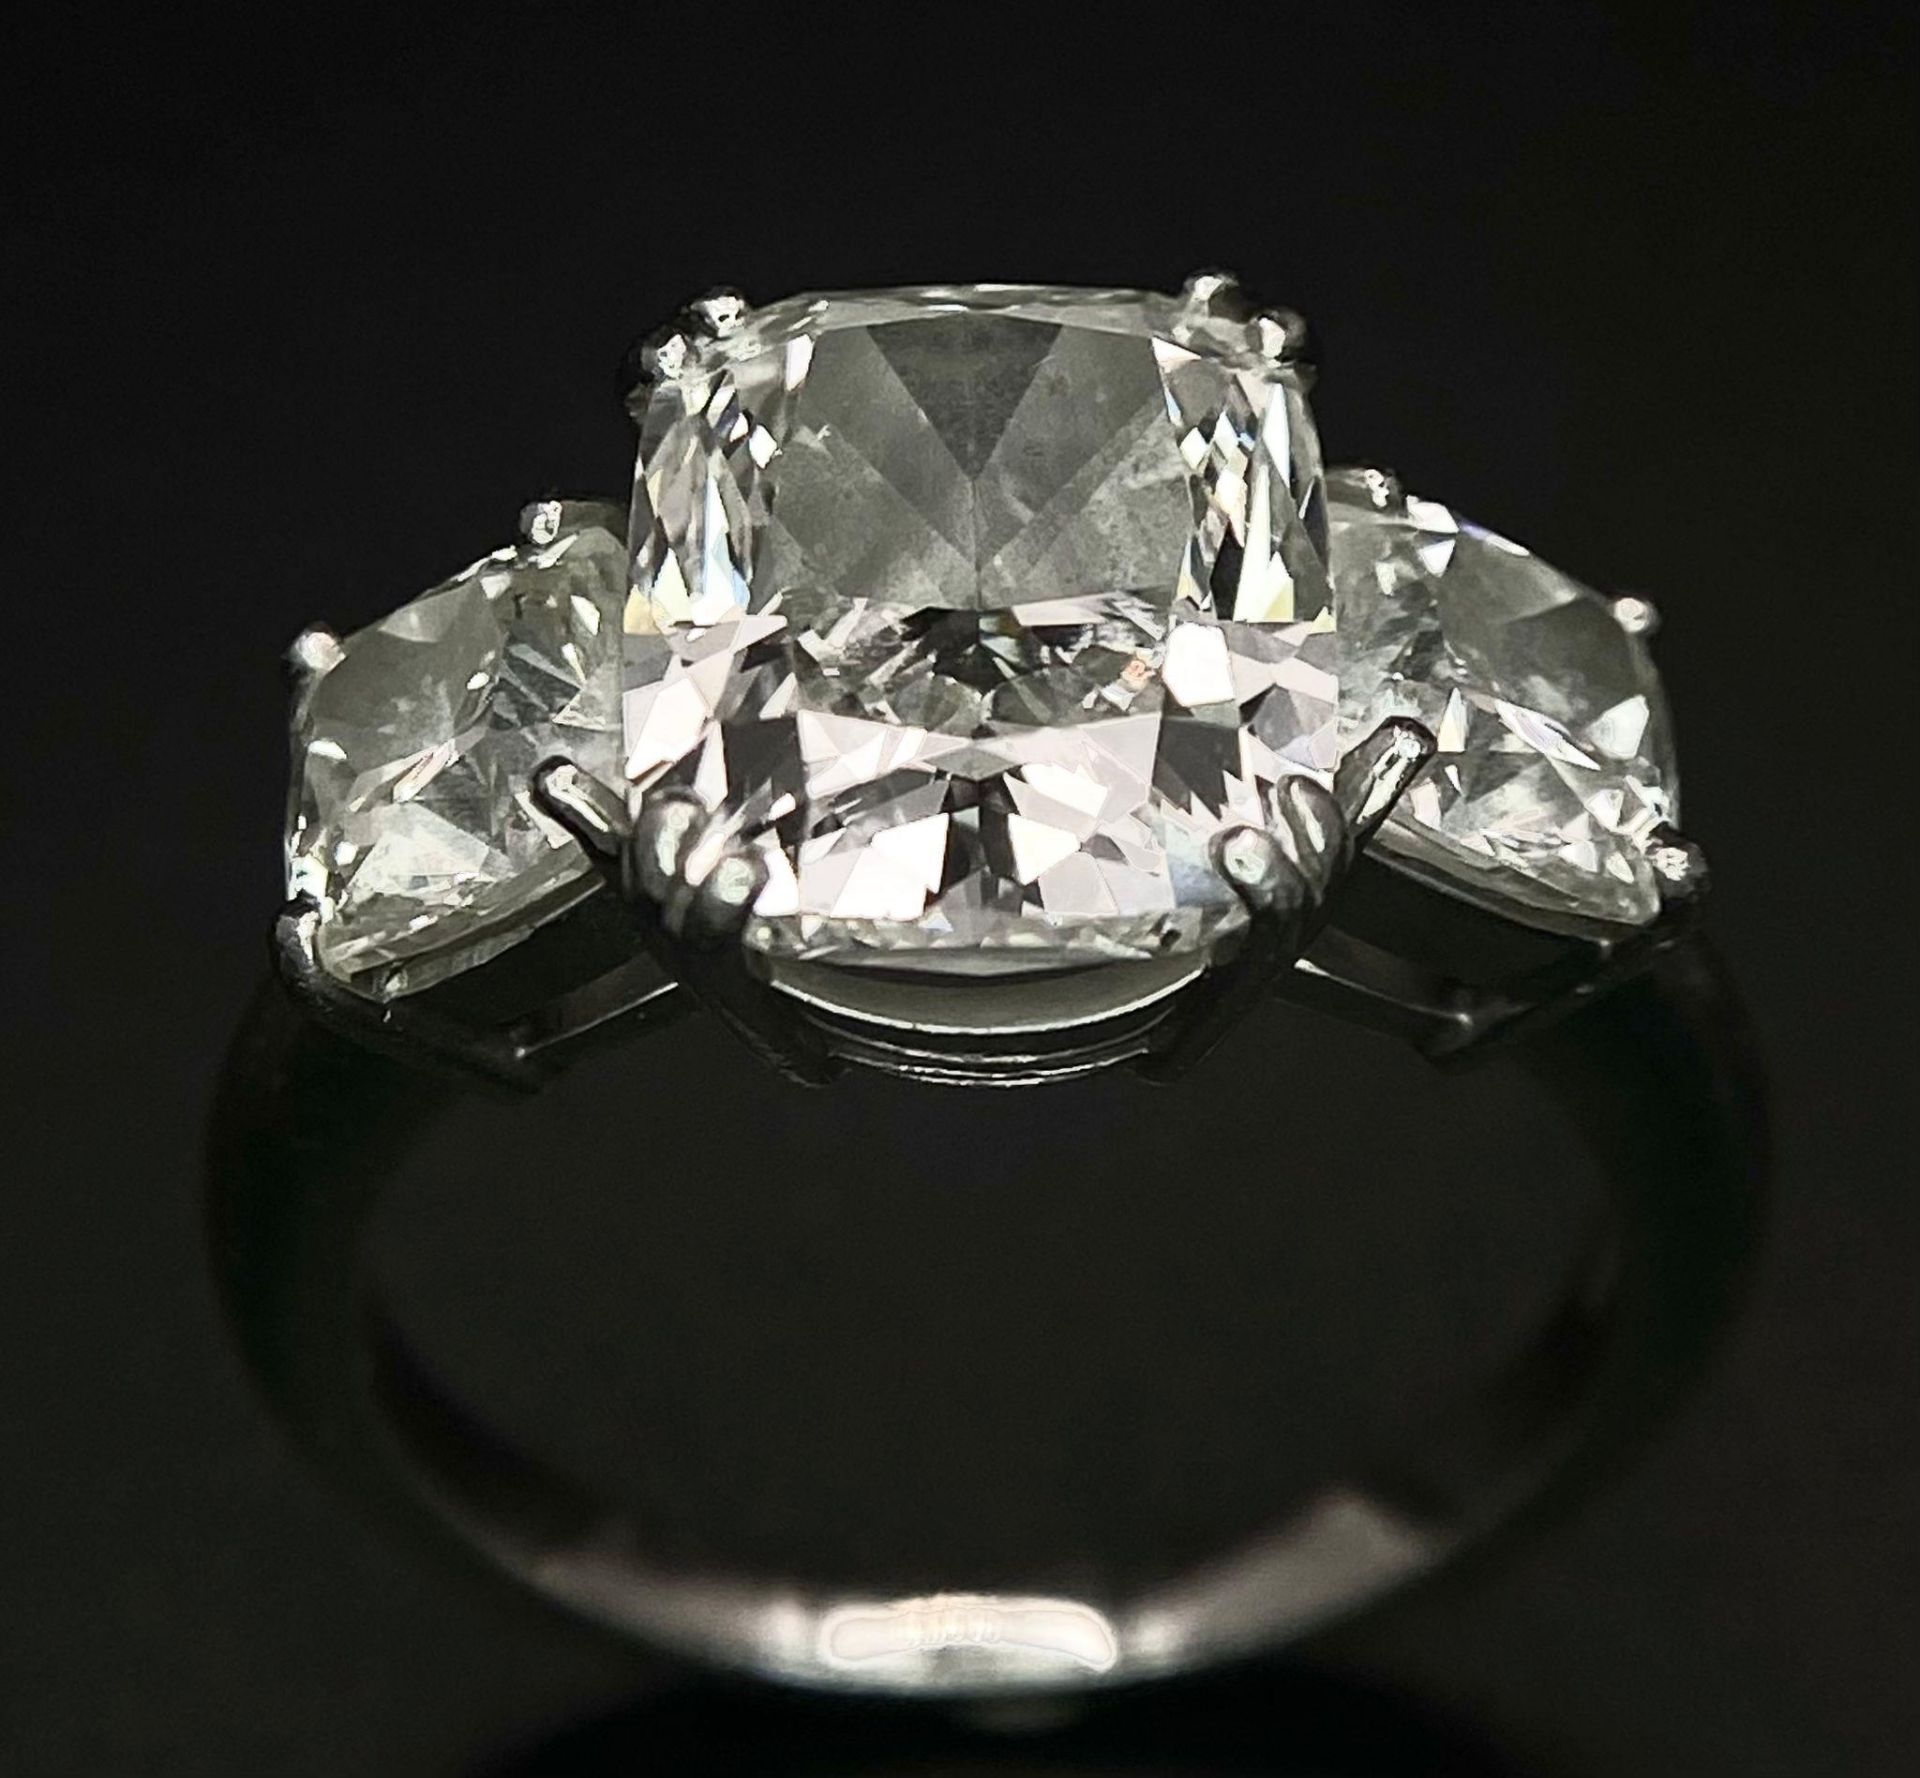 A Breathtaking 4.01ct GIA Certified Diamond Ring. A brilliant cushion cut 4.01ct central diamond - Image 3 of 21